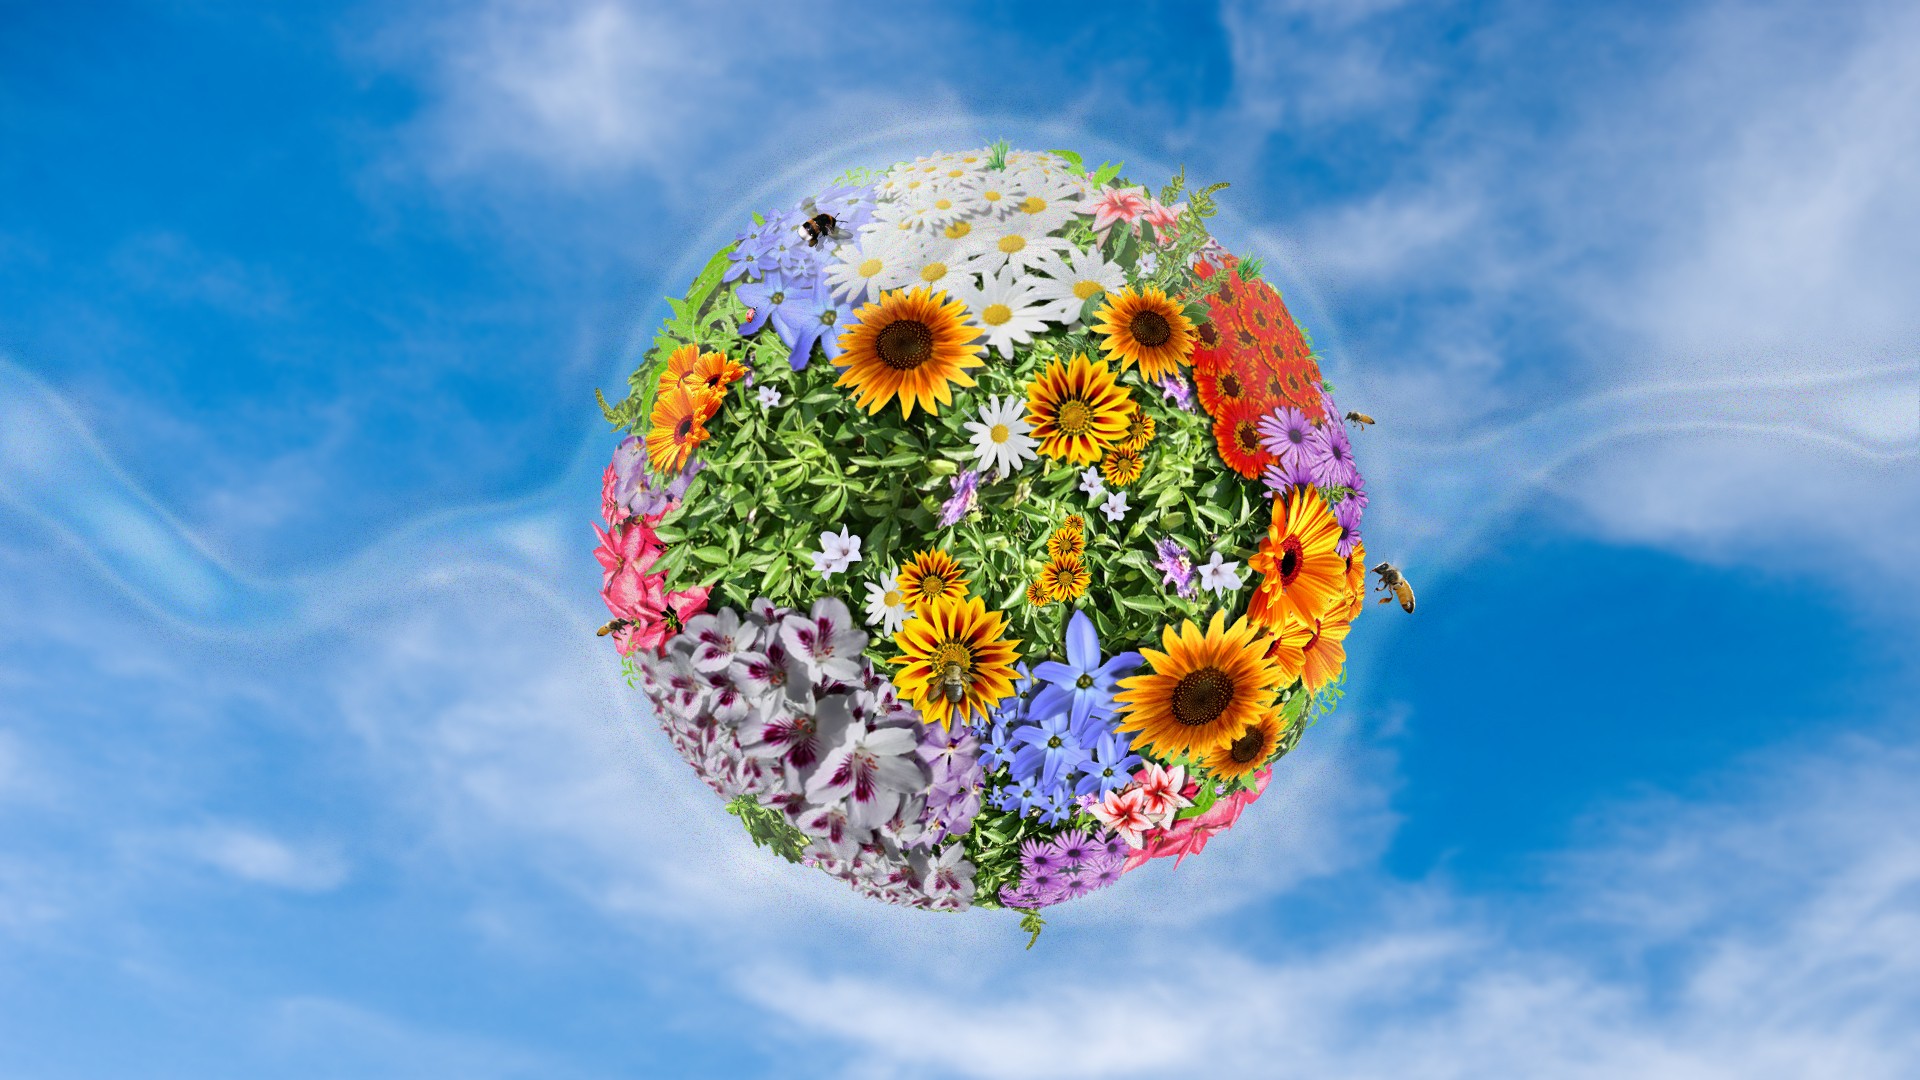 photo manipulation, Nature, Flowers, Leaves, Sunflowers, Bees, Sphere, Sky, Clouds, Colorful Wallpaper